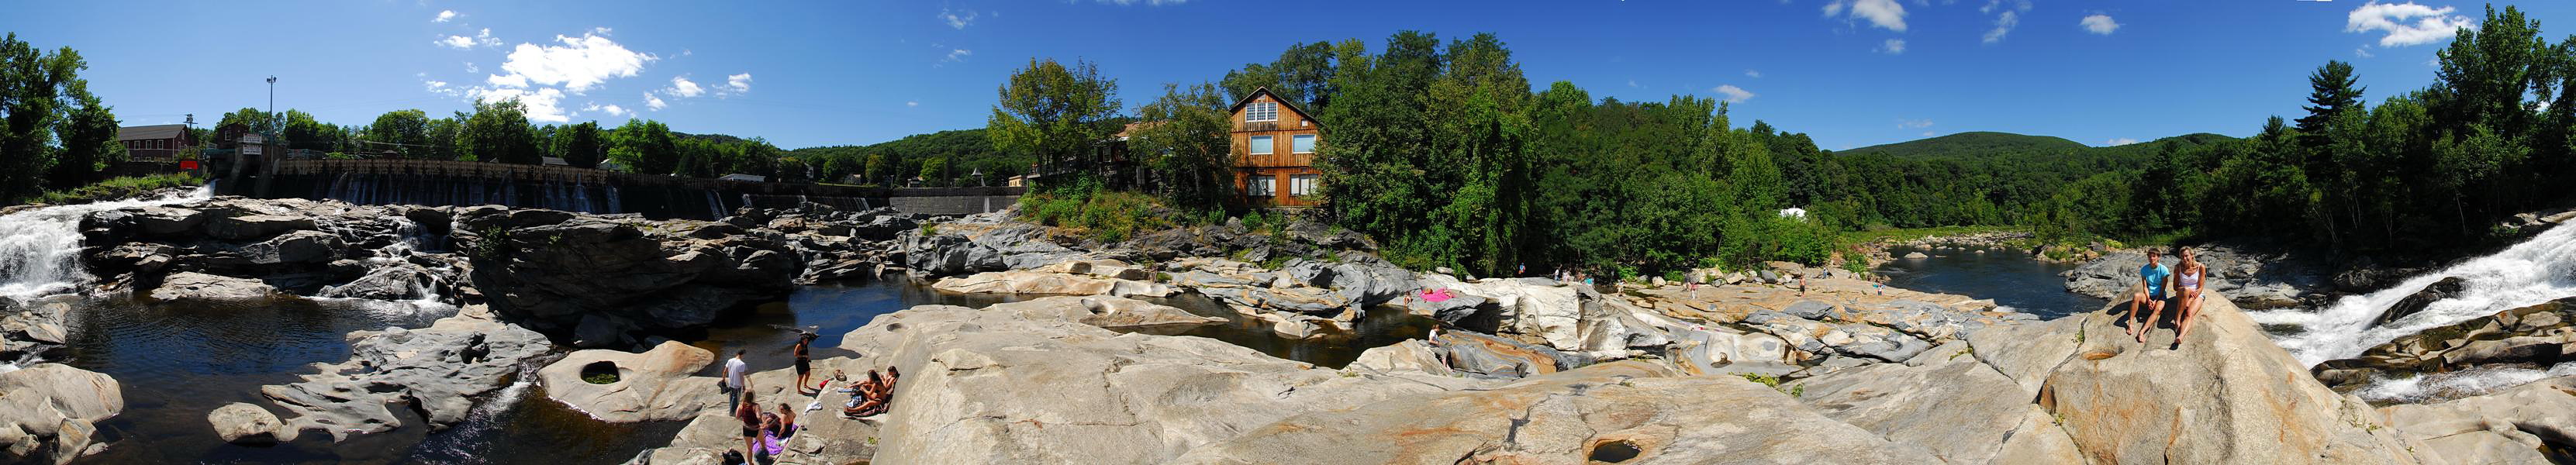 panoramic, panoramicblue sky, rocks, scenic landscape, trees, water